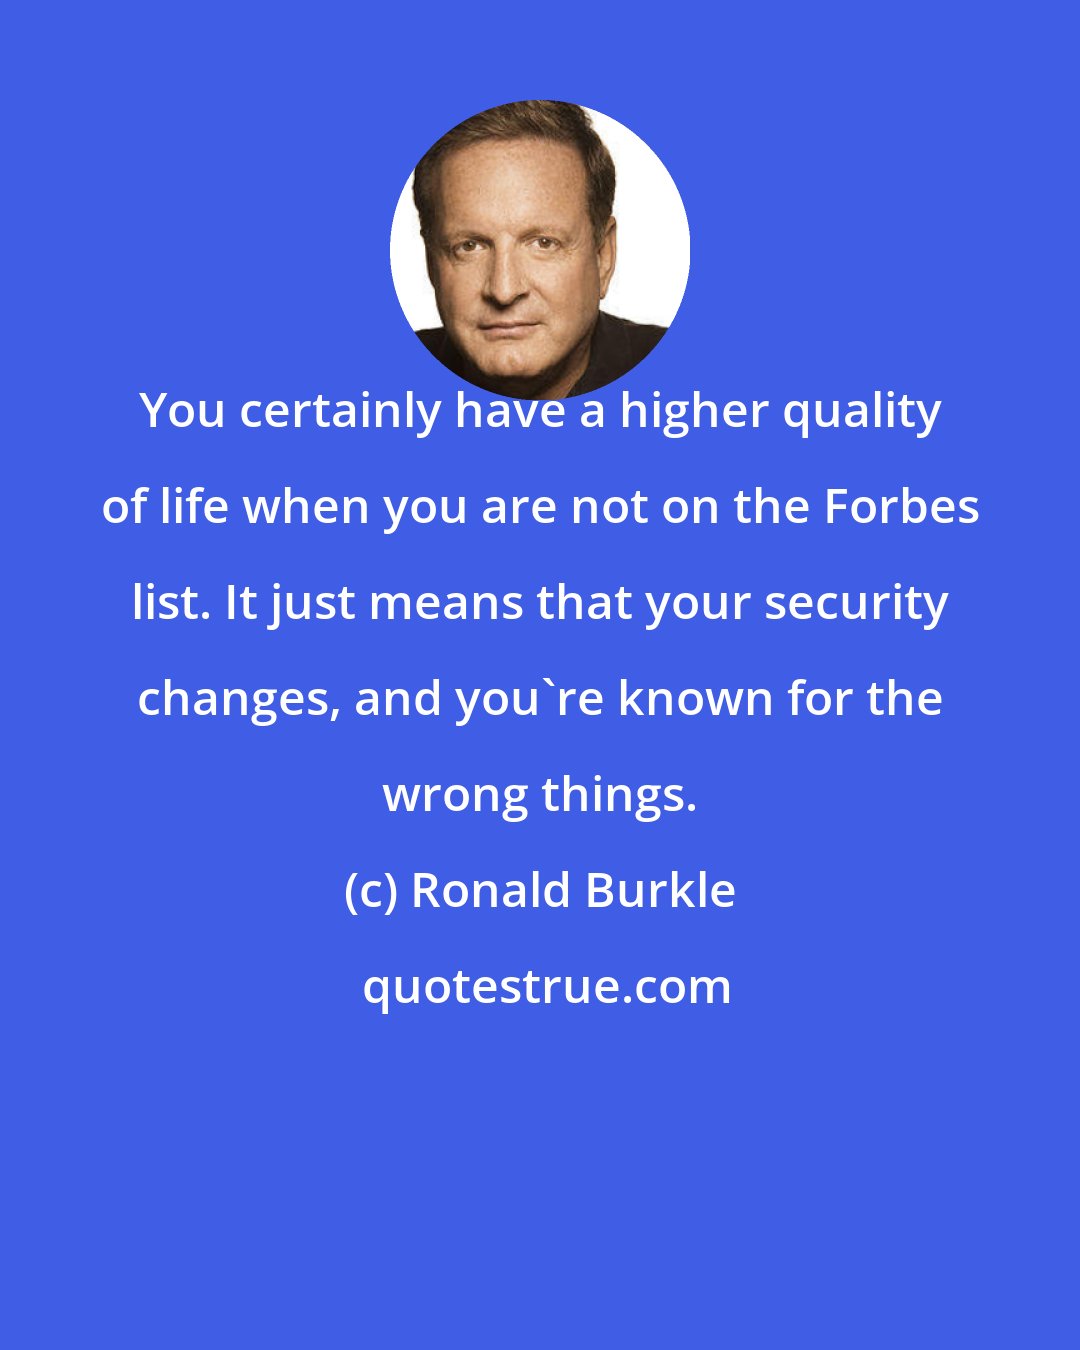 Ronald Burkle: You certainly have a higher quality of life when you are not on the Forbes list. It just means that your security changes, and you're known for the wrong things.